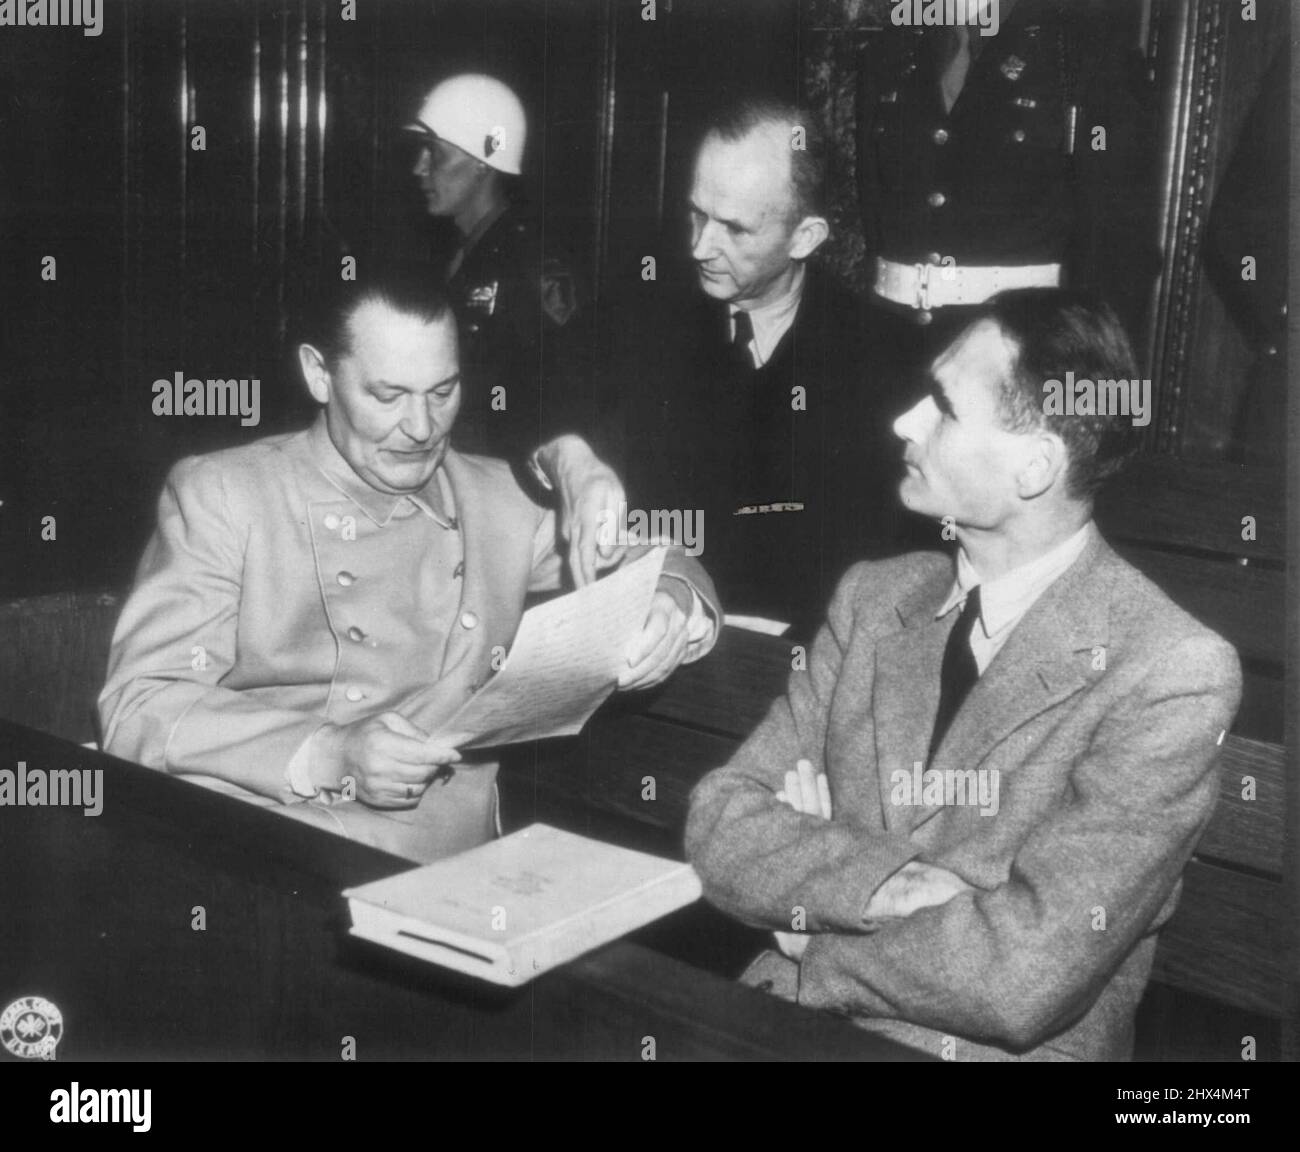 Defendants Huddle At Nuremberg -- Hermann Godering, Karl Doenitz and Rudolf Hess (Left to Right), Three of the Defendants in the war crimes trial of Big-Wig Nazis at Nuremberg, Germany have a chat before convening of a court session. January 7, 1946. (Photo by AP Wirephoto). Stock Photo